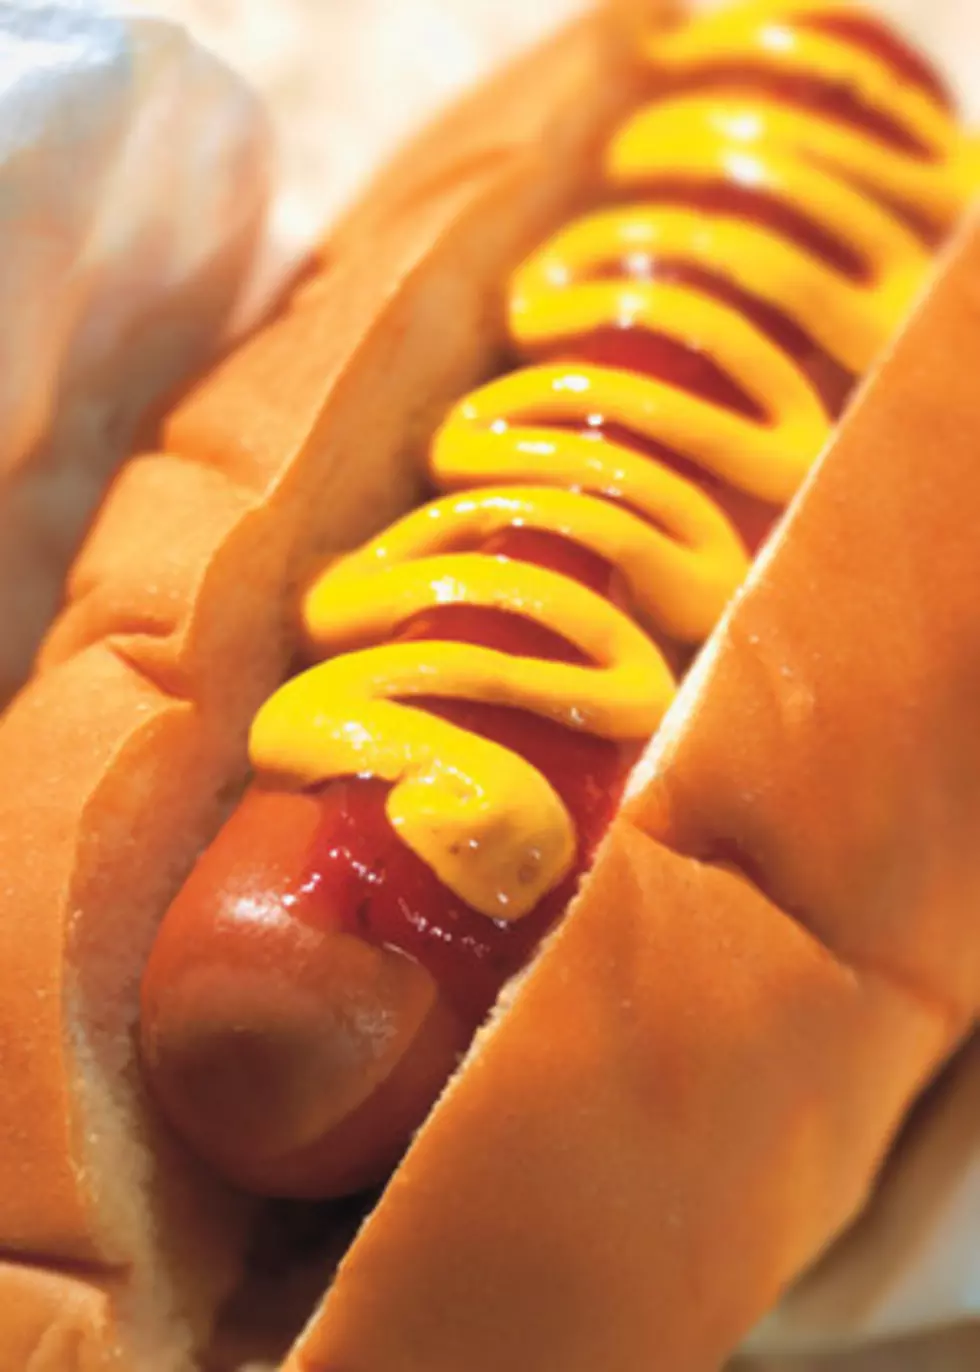 July 23 Is National Hot Dog Day!